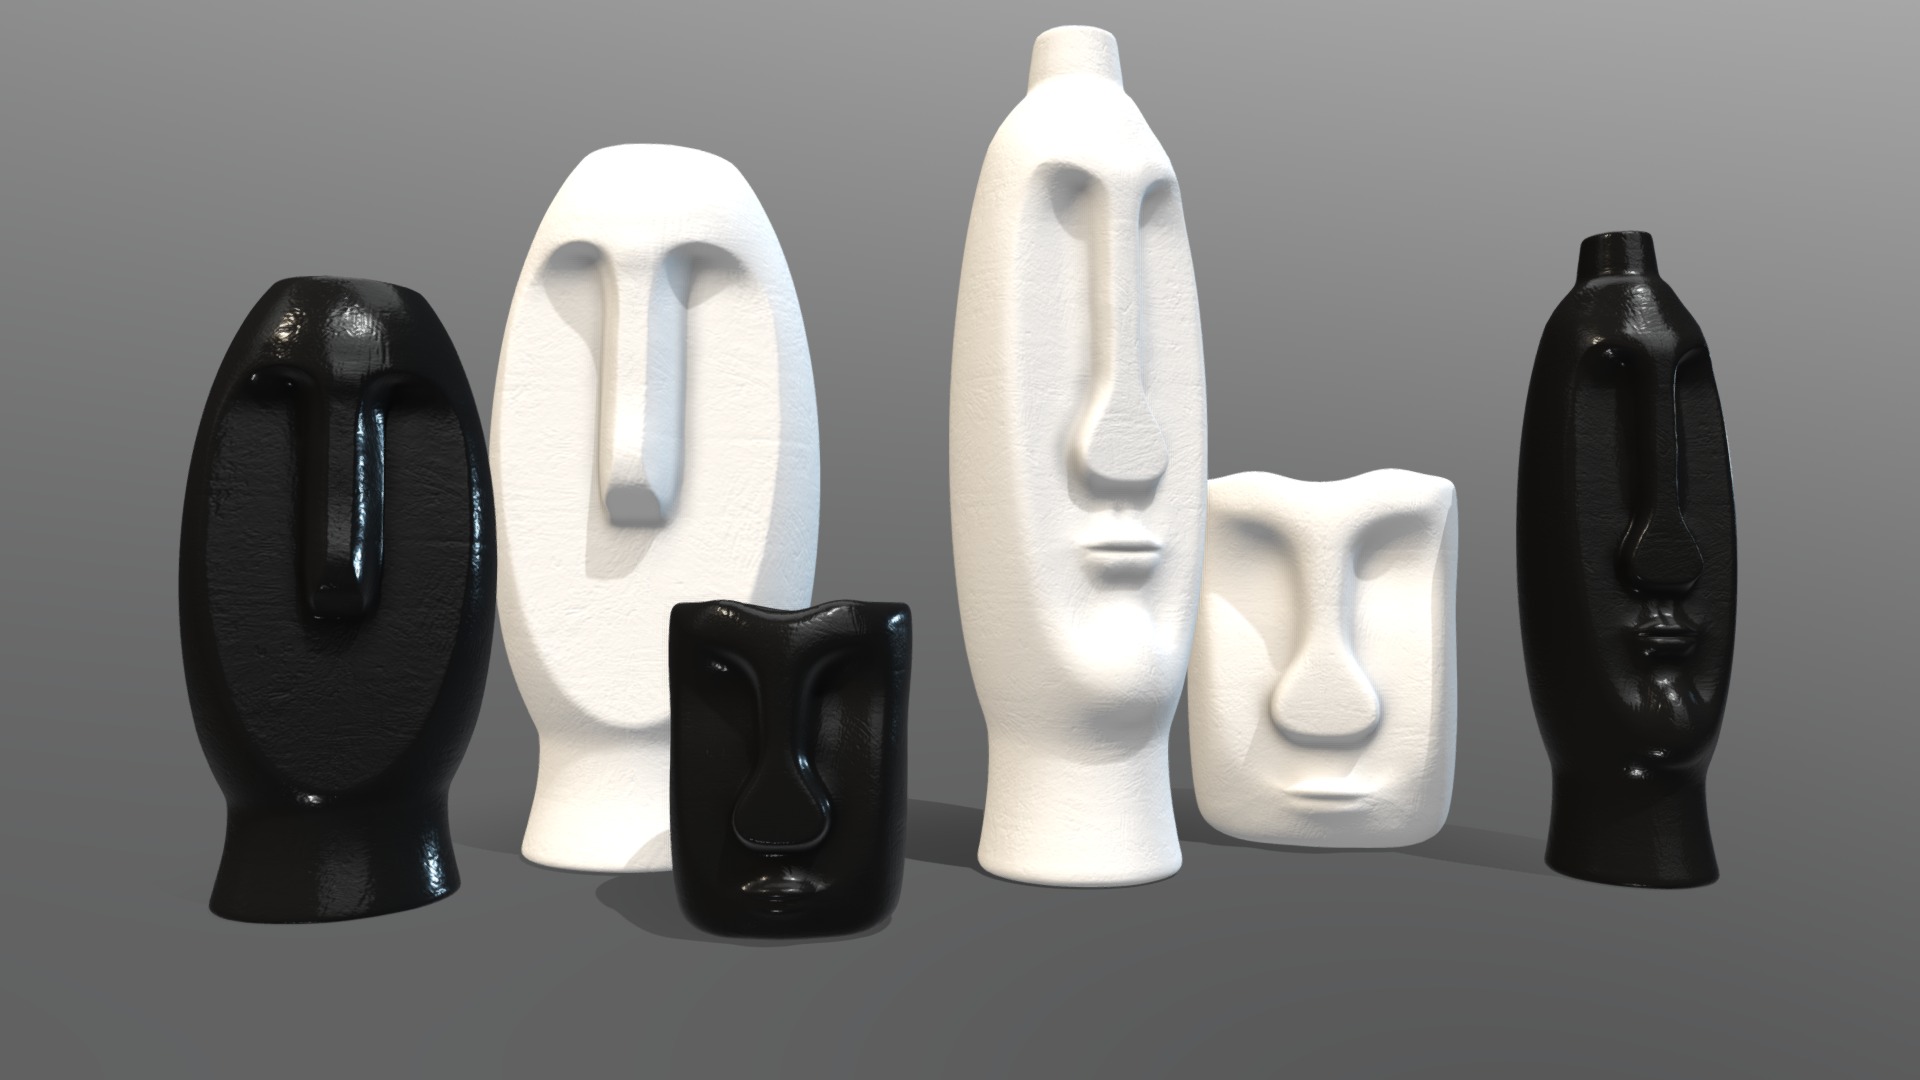 3D model Vases in form of idols - This is a 3D model of the Vases in form of idols. The 3D model is about a group of black and white vases.